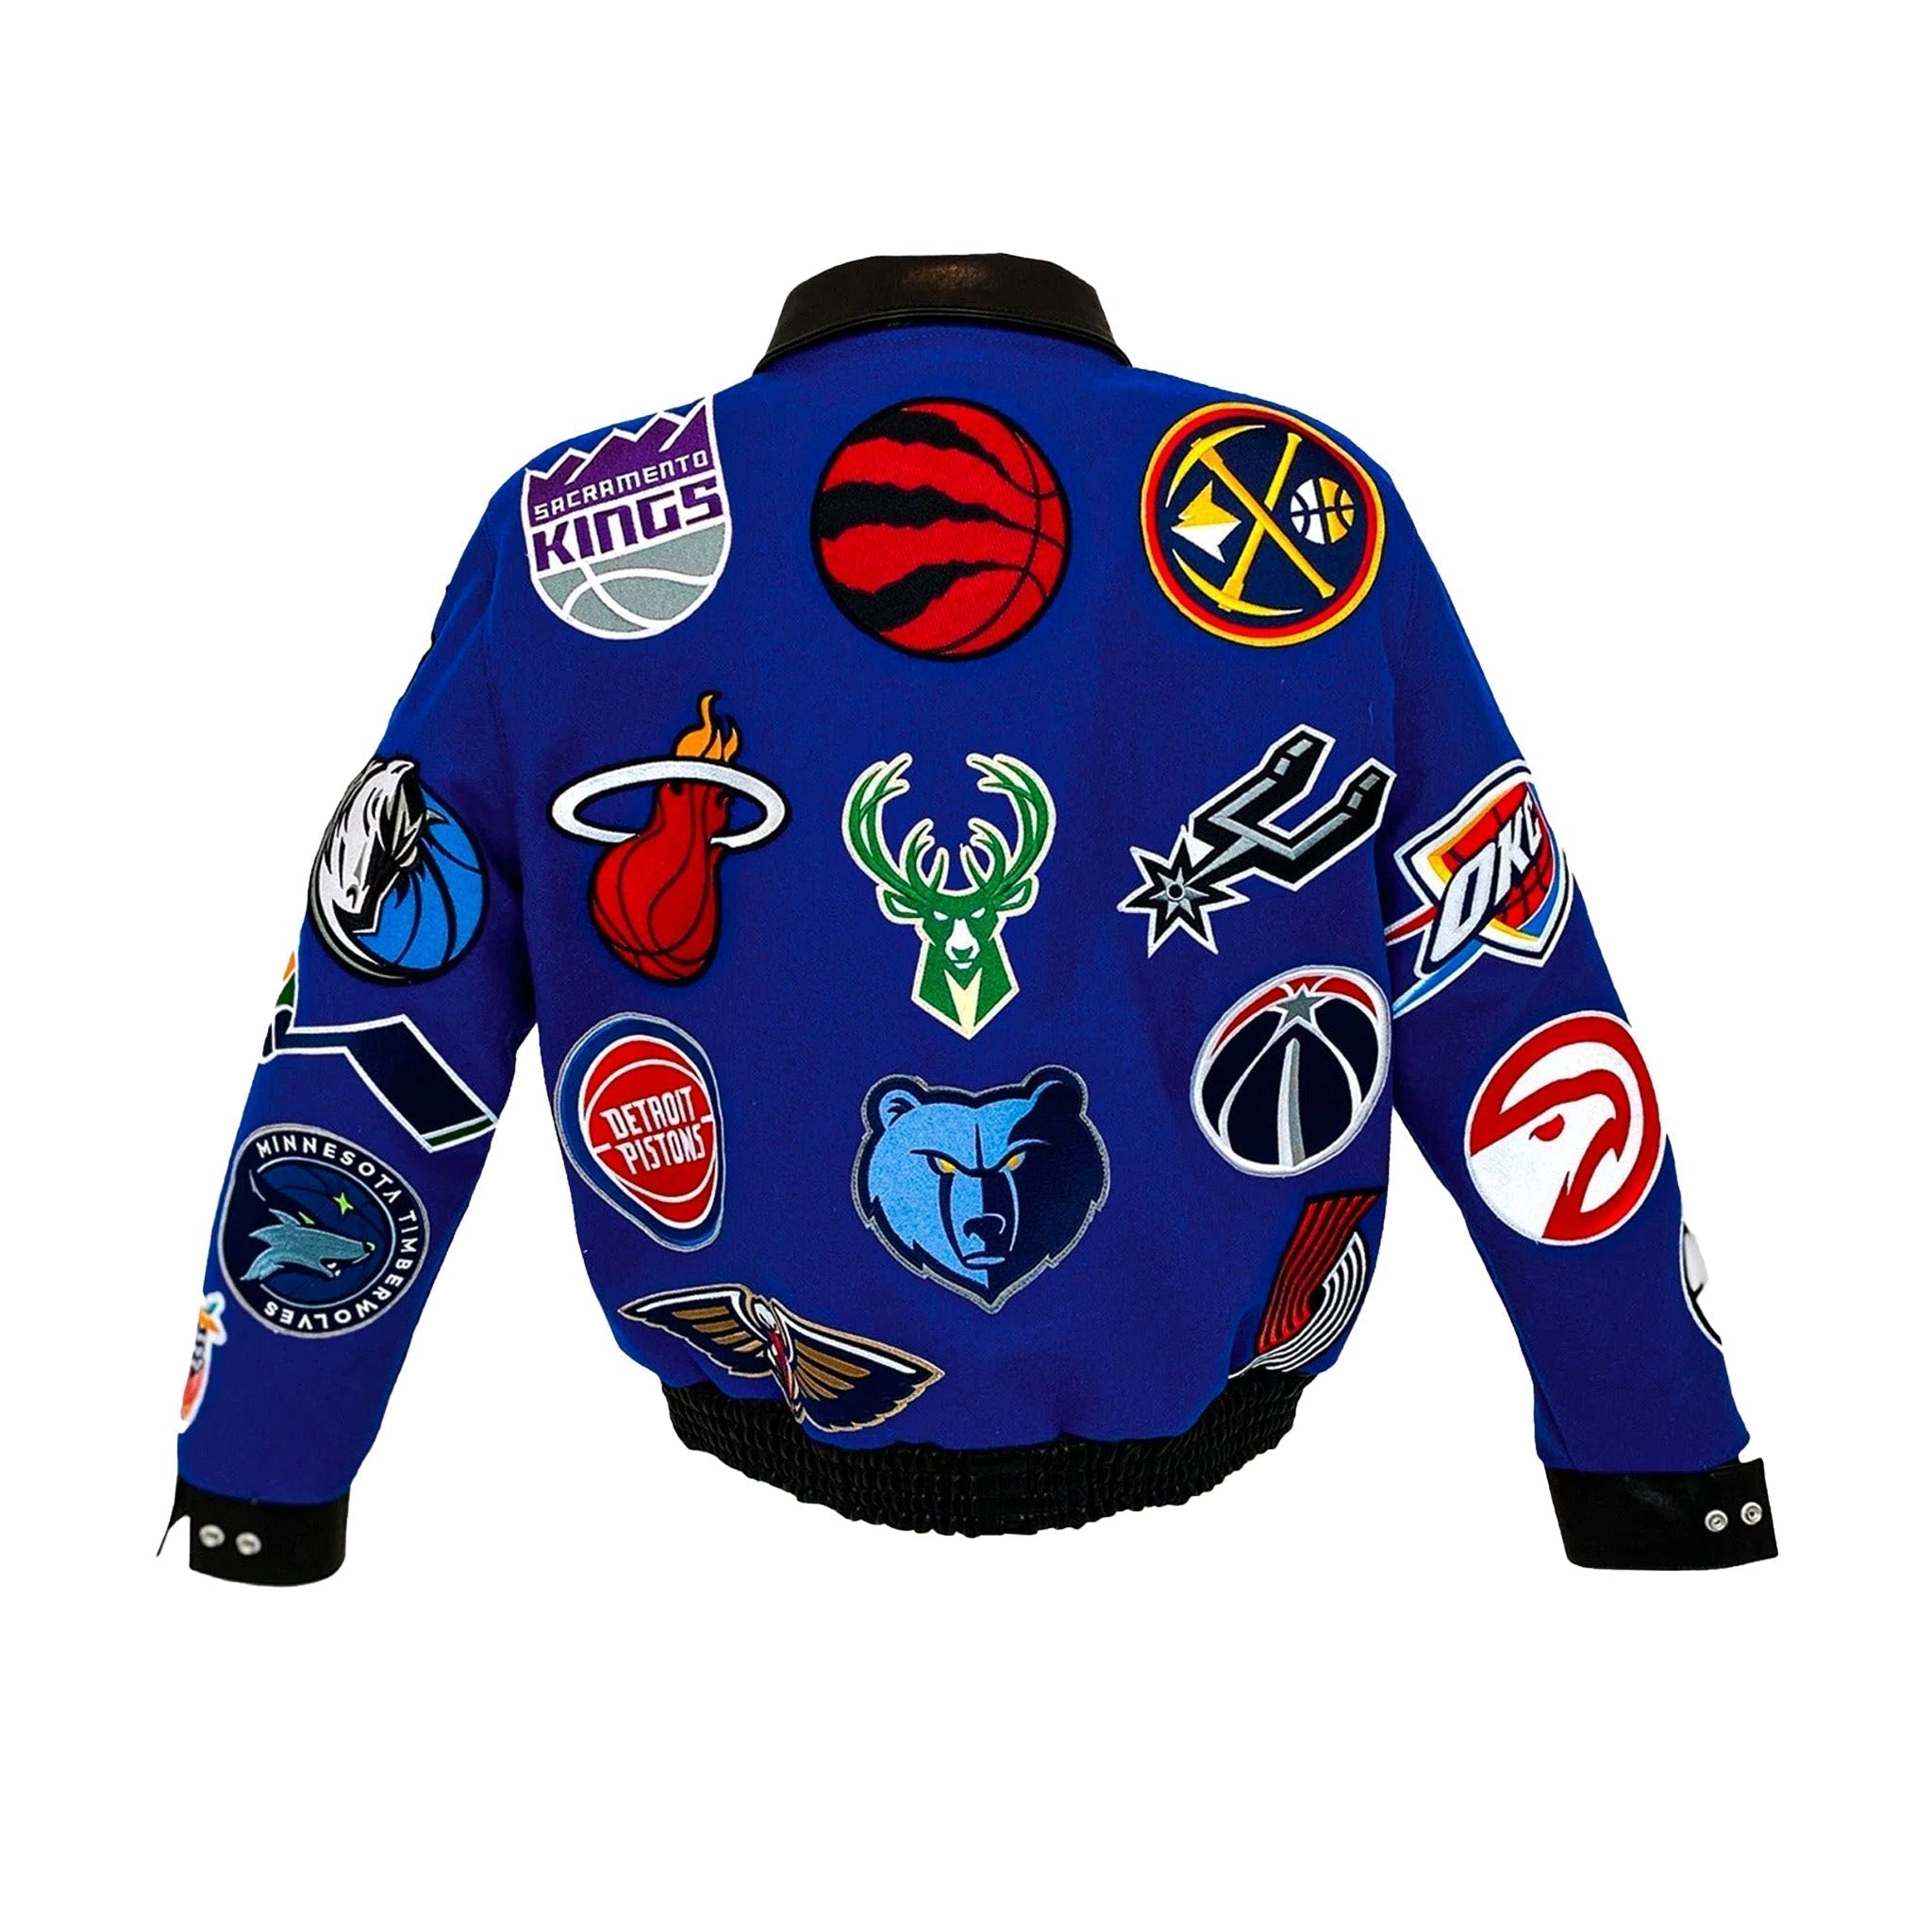 NBA Collage Wool & Leather Jacket Blue